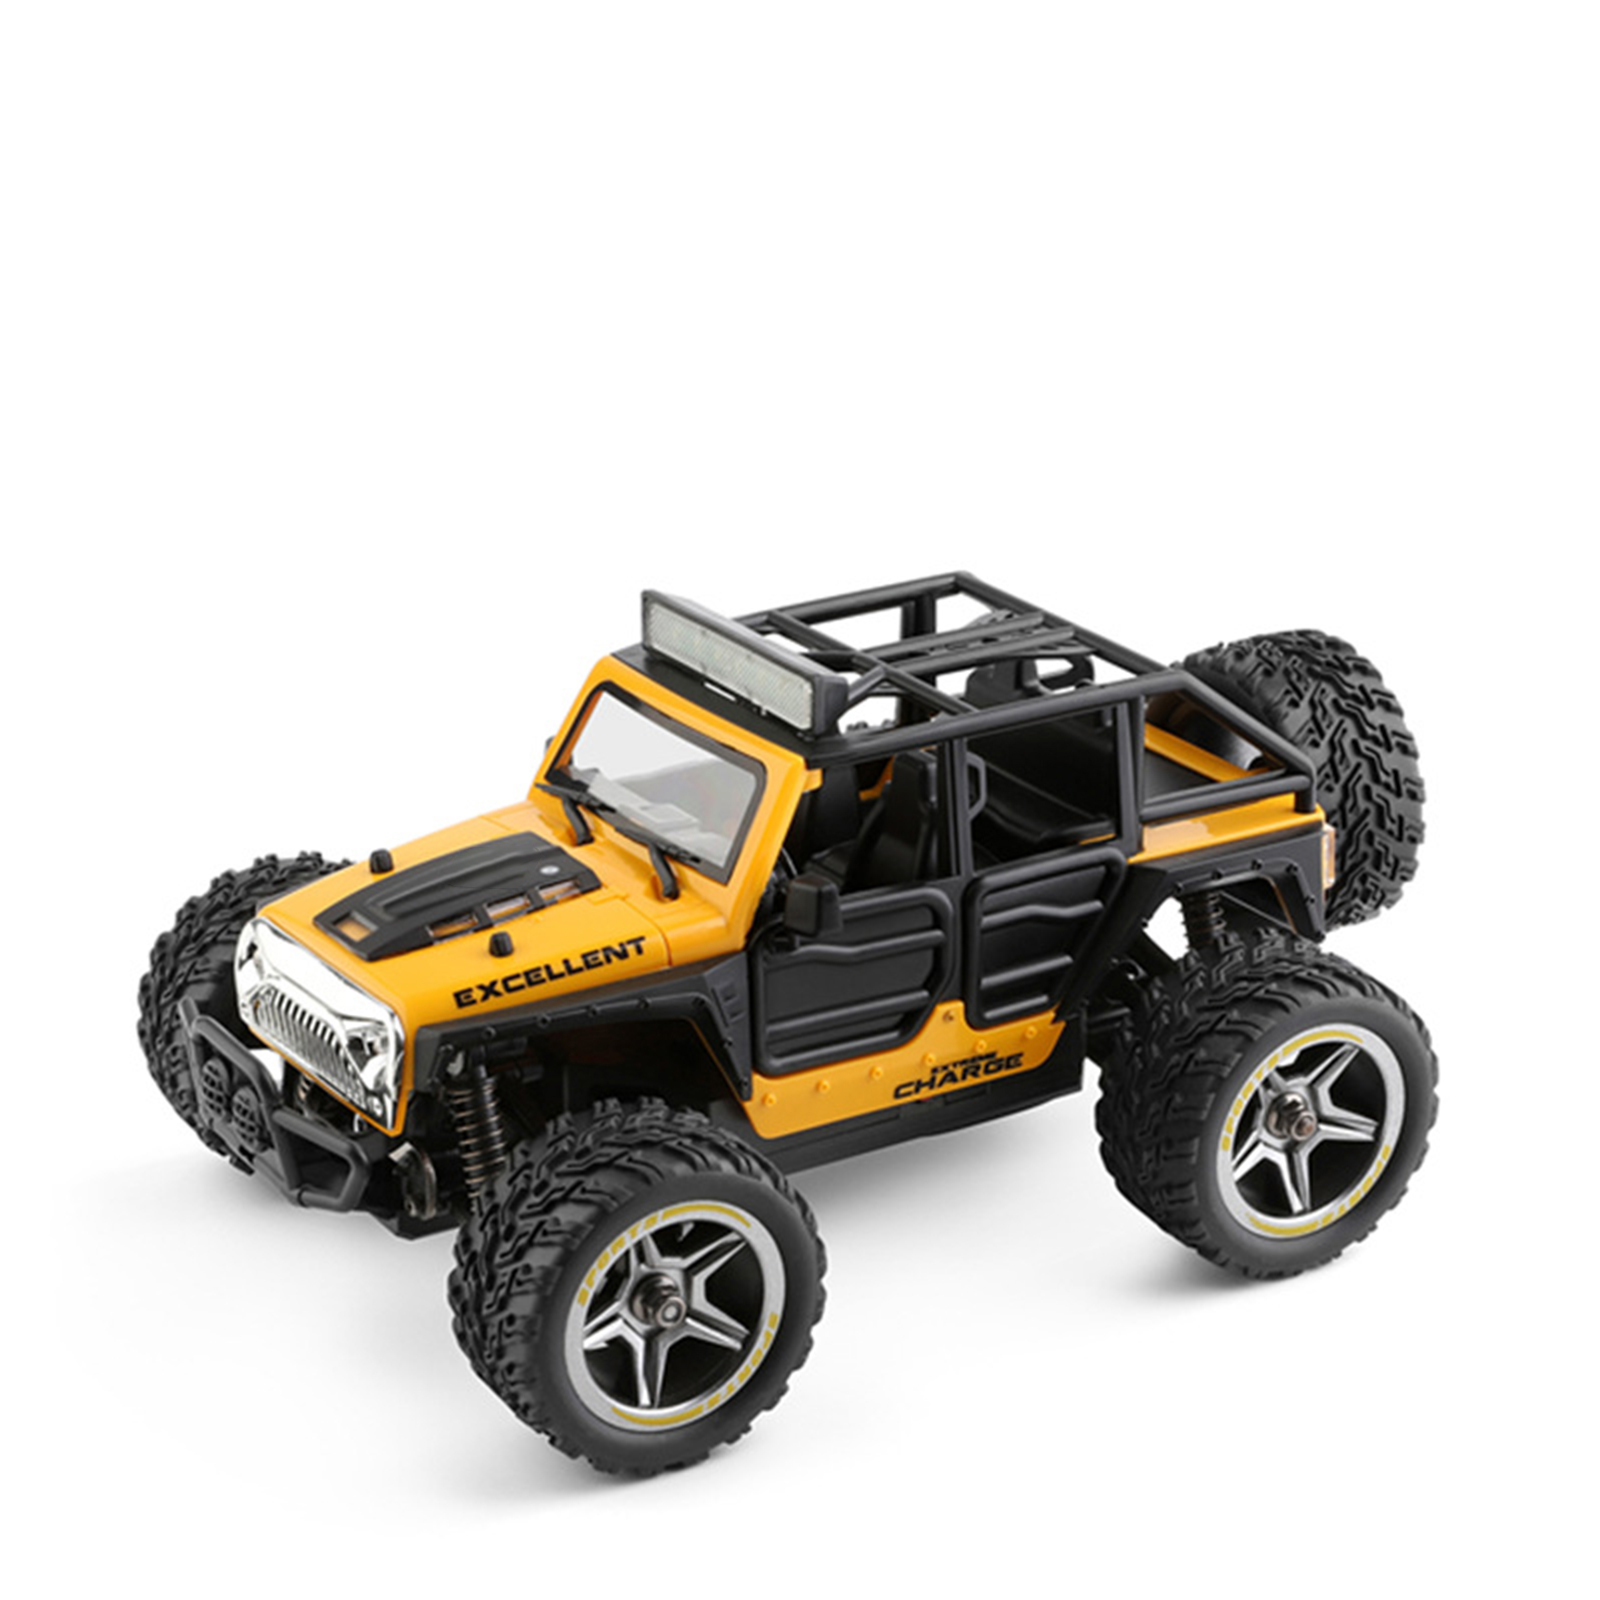 WLtoys 22201 1:22 RC Car with Light 2wd 22km/H High Speed Off-Road Vehicle RC Drift Car Model Toys